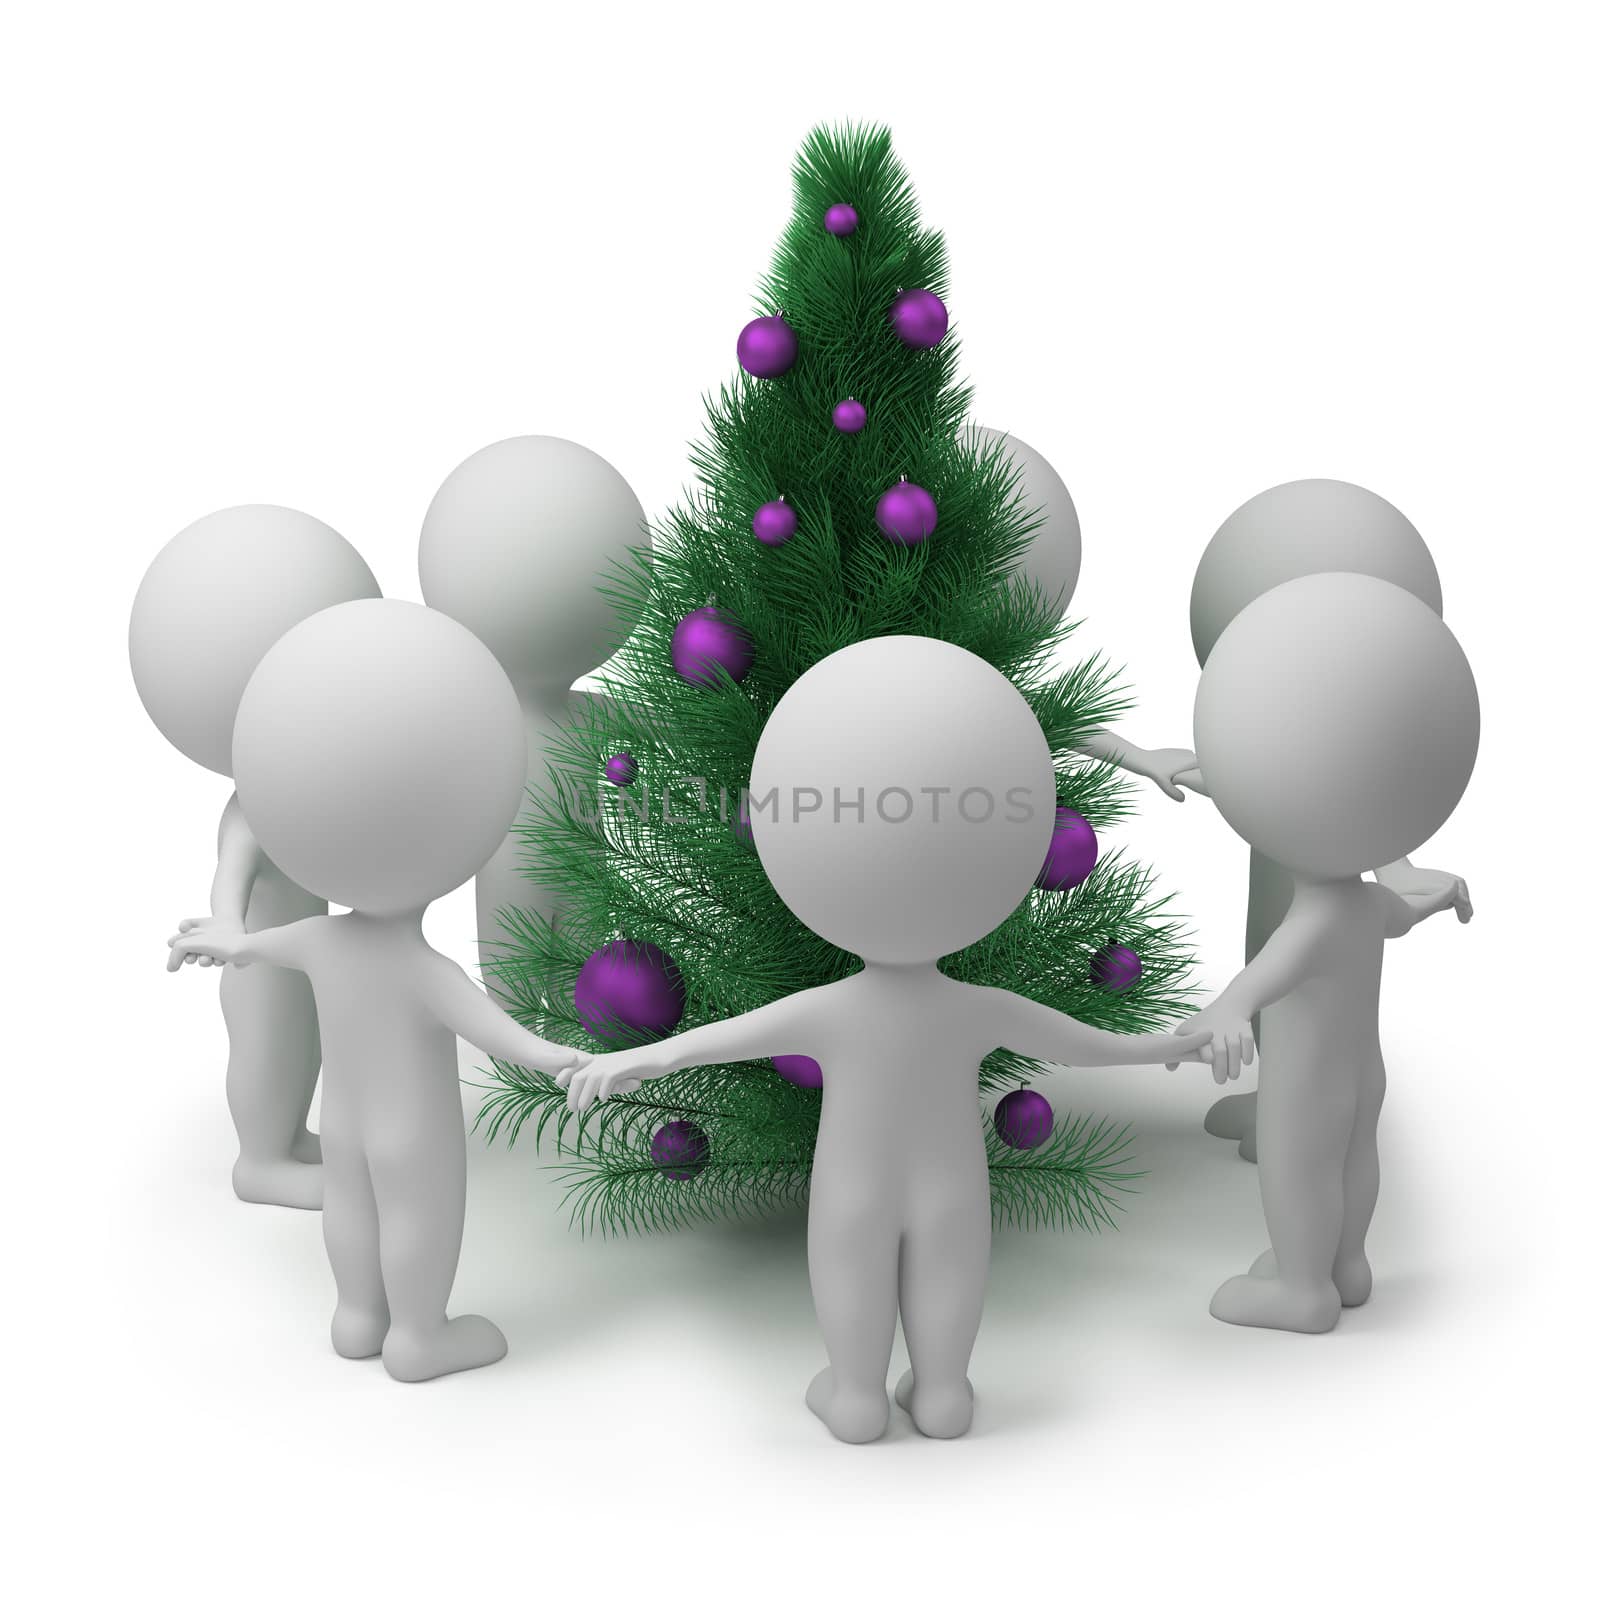 3d small people dancing round a New Year's fur-tree. 3d image. Isolated white background.